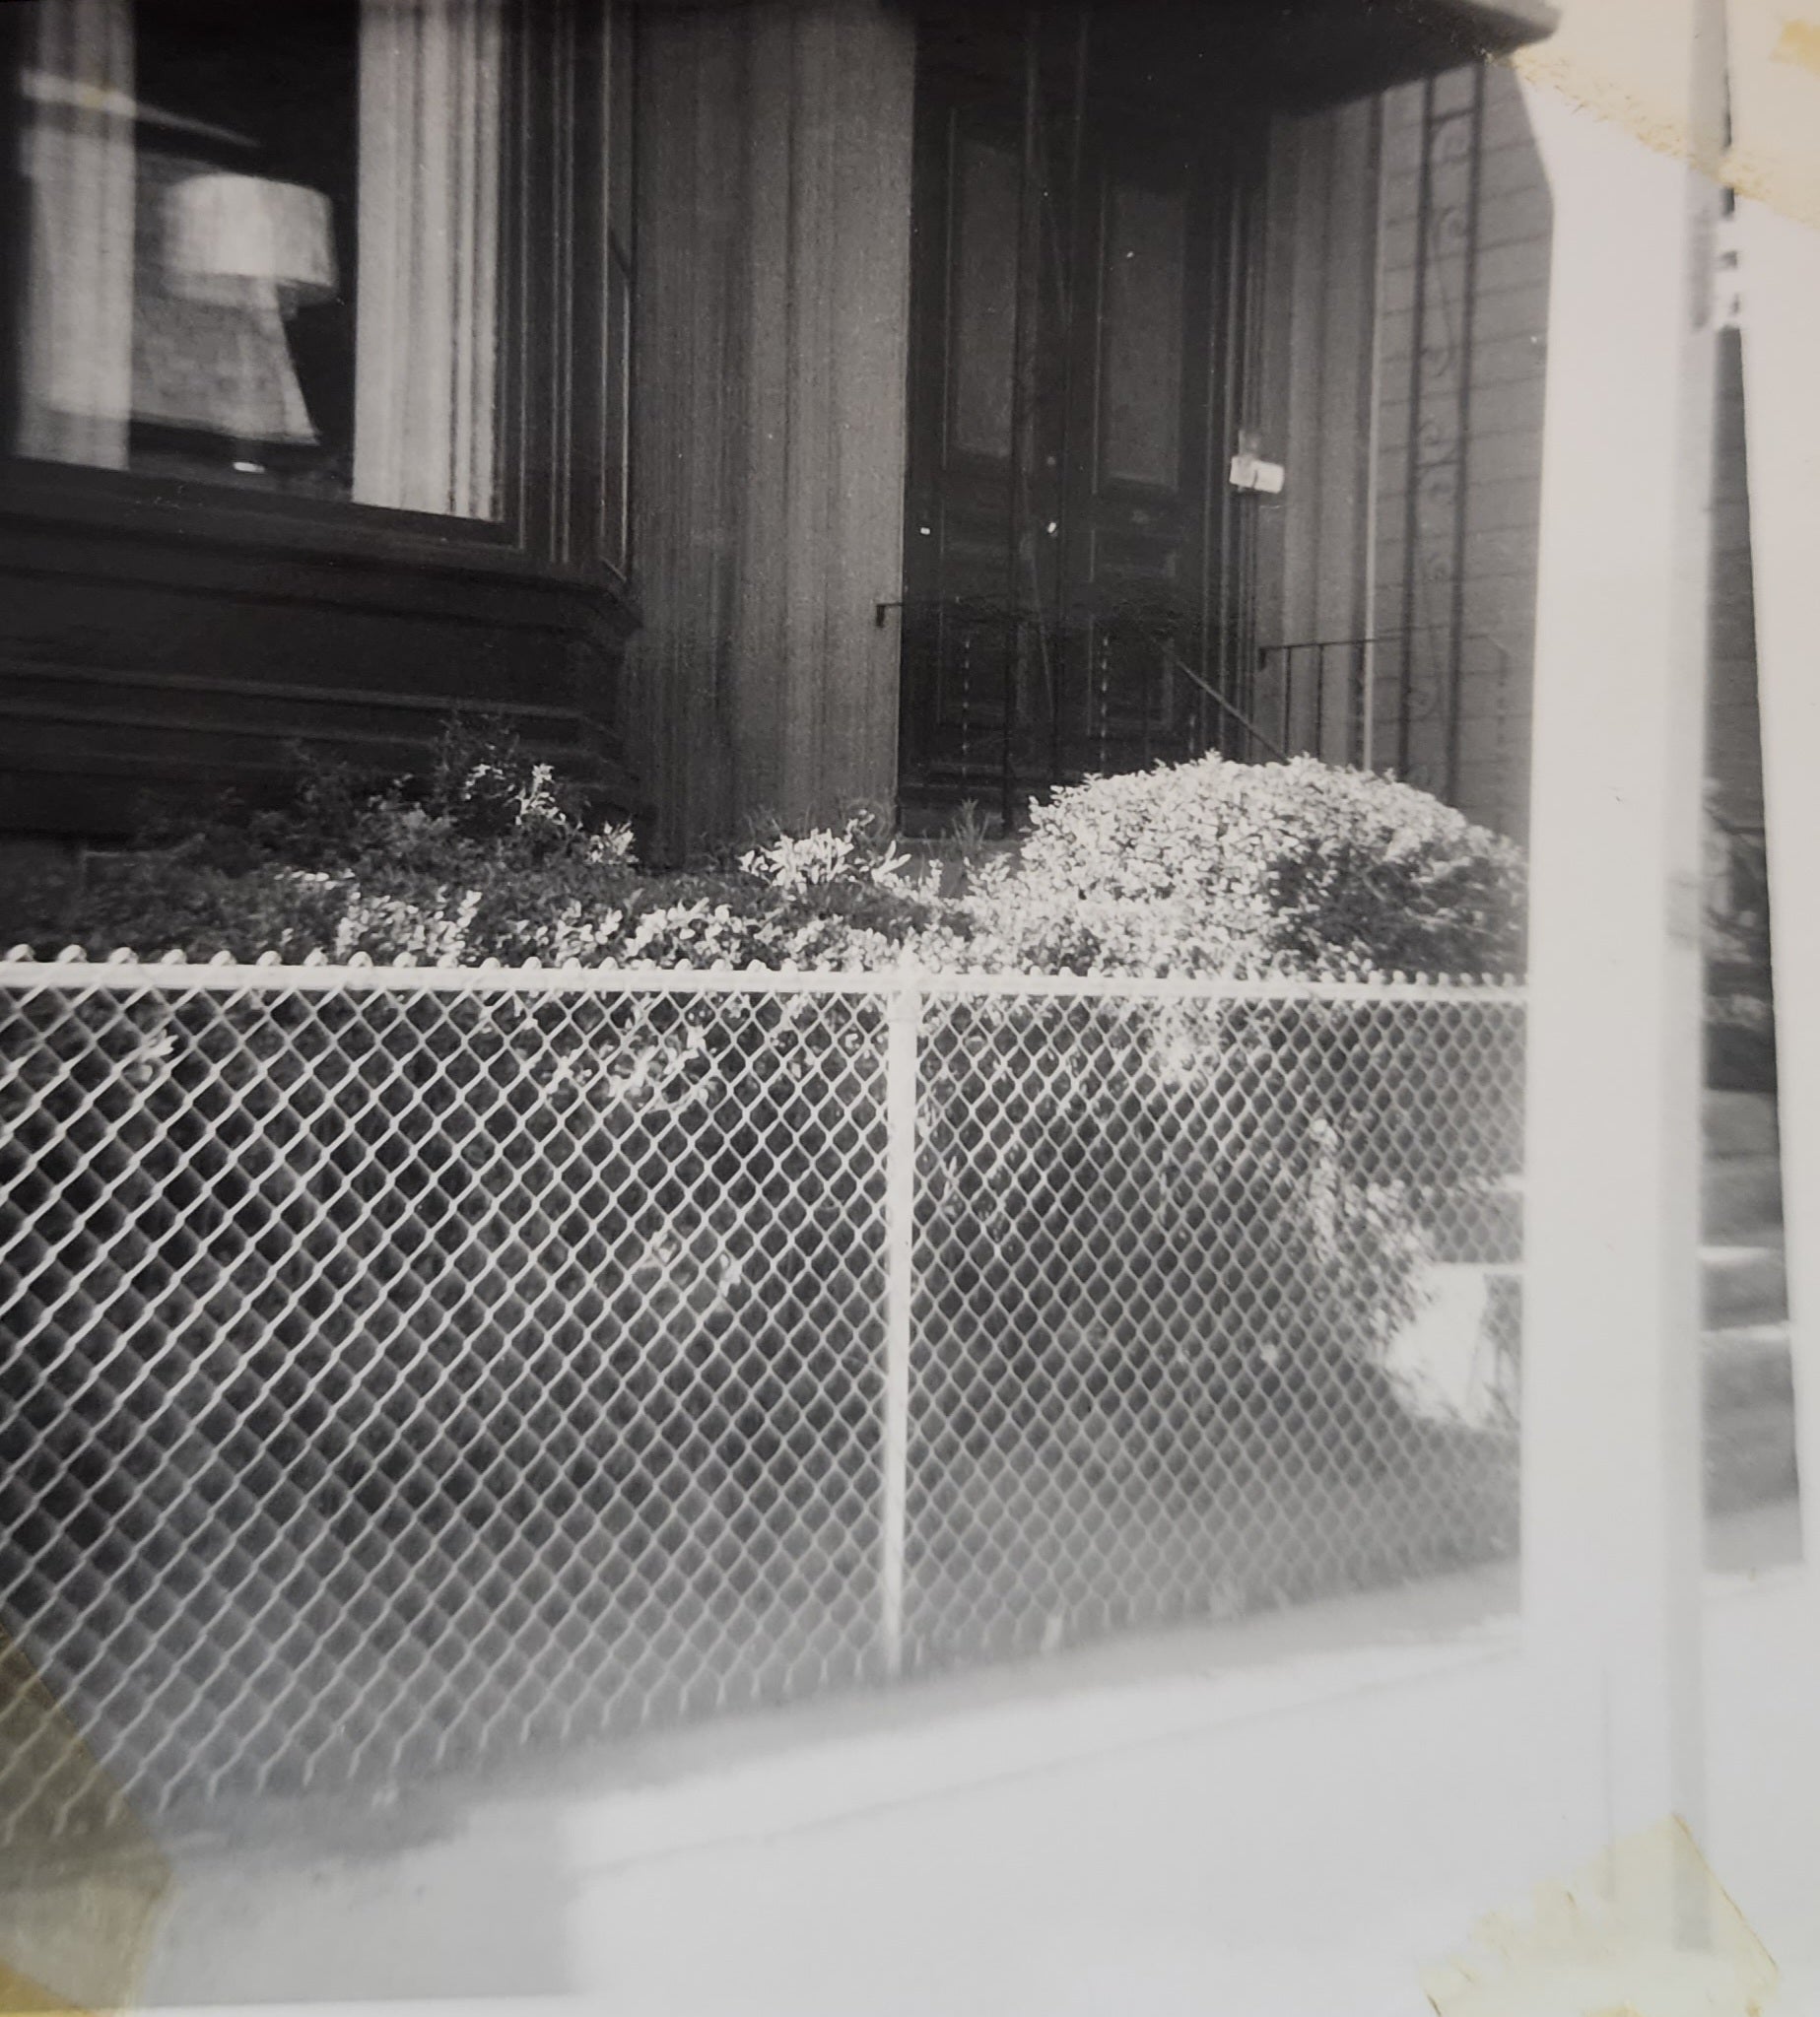 A black and white photo of a Victorian with a wire fence in front of a bunch of shrubs. There is a lamp with a wide base and a white lampshade in the picture window, framed by horizontally striped curtains.